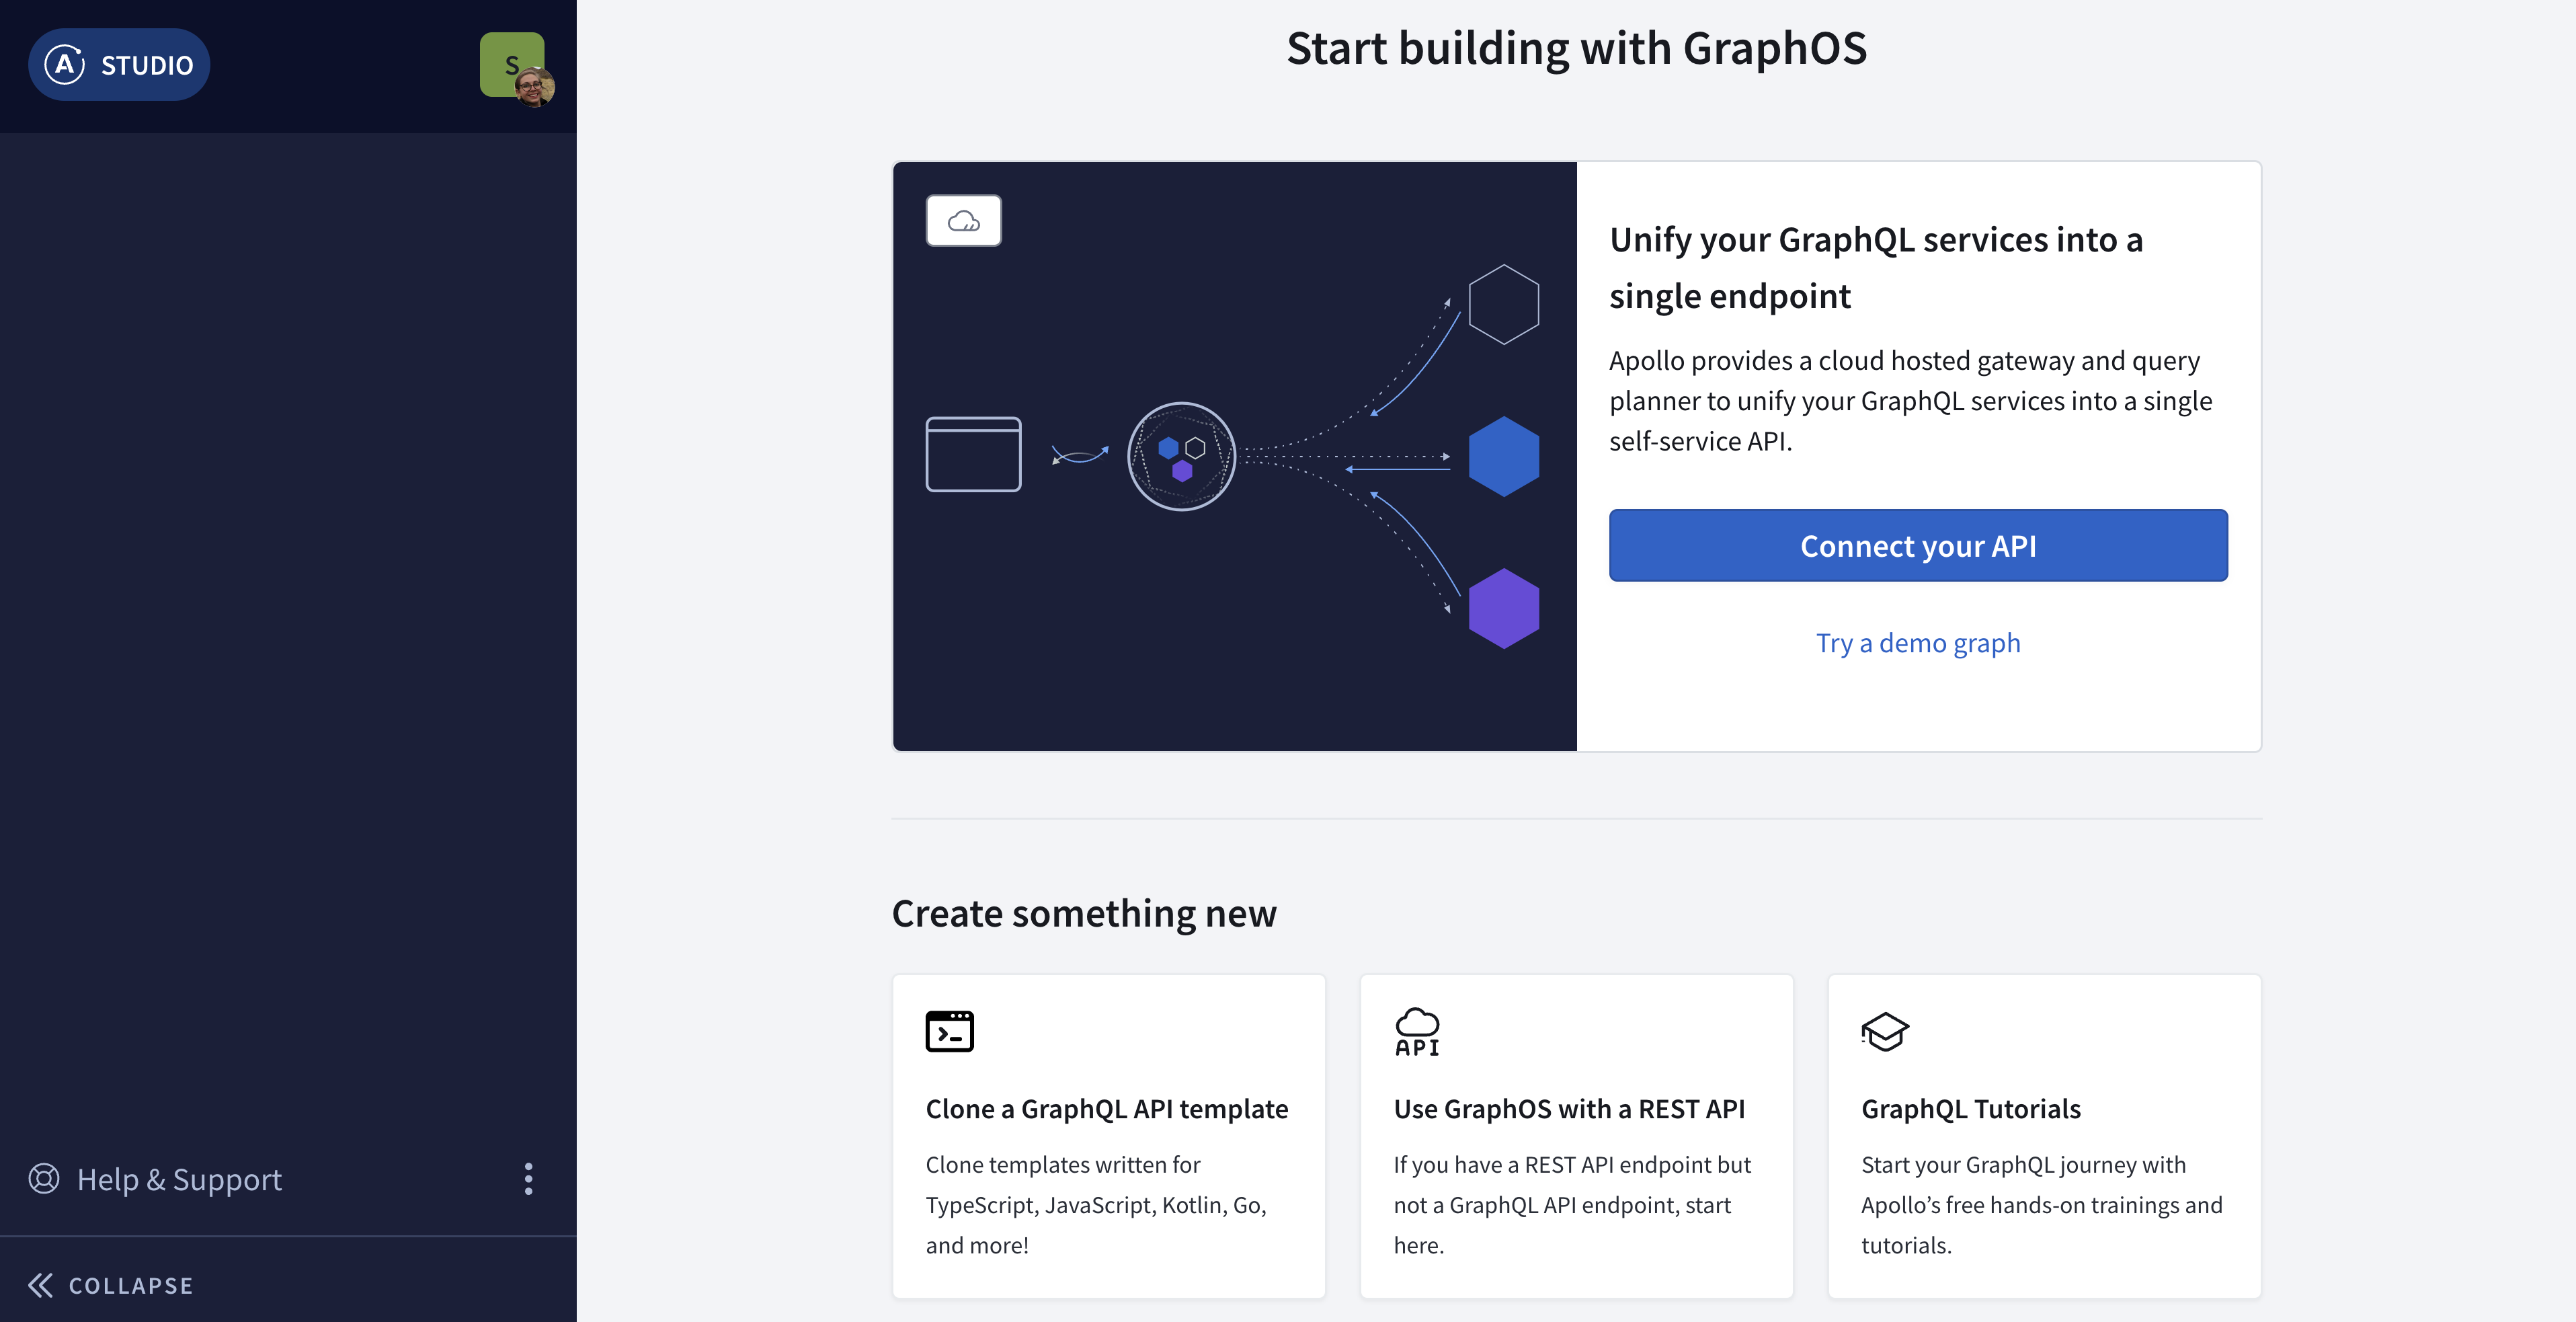 The landing page for creating a new GraphQL API, showing a Connect Your API button and a Try a demo graph button.